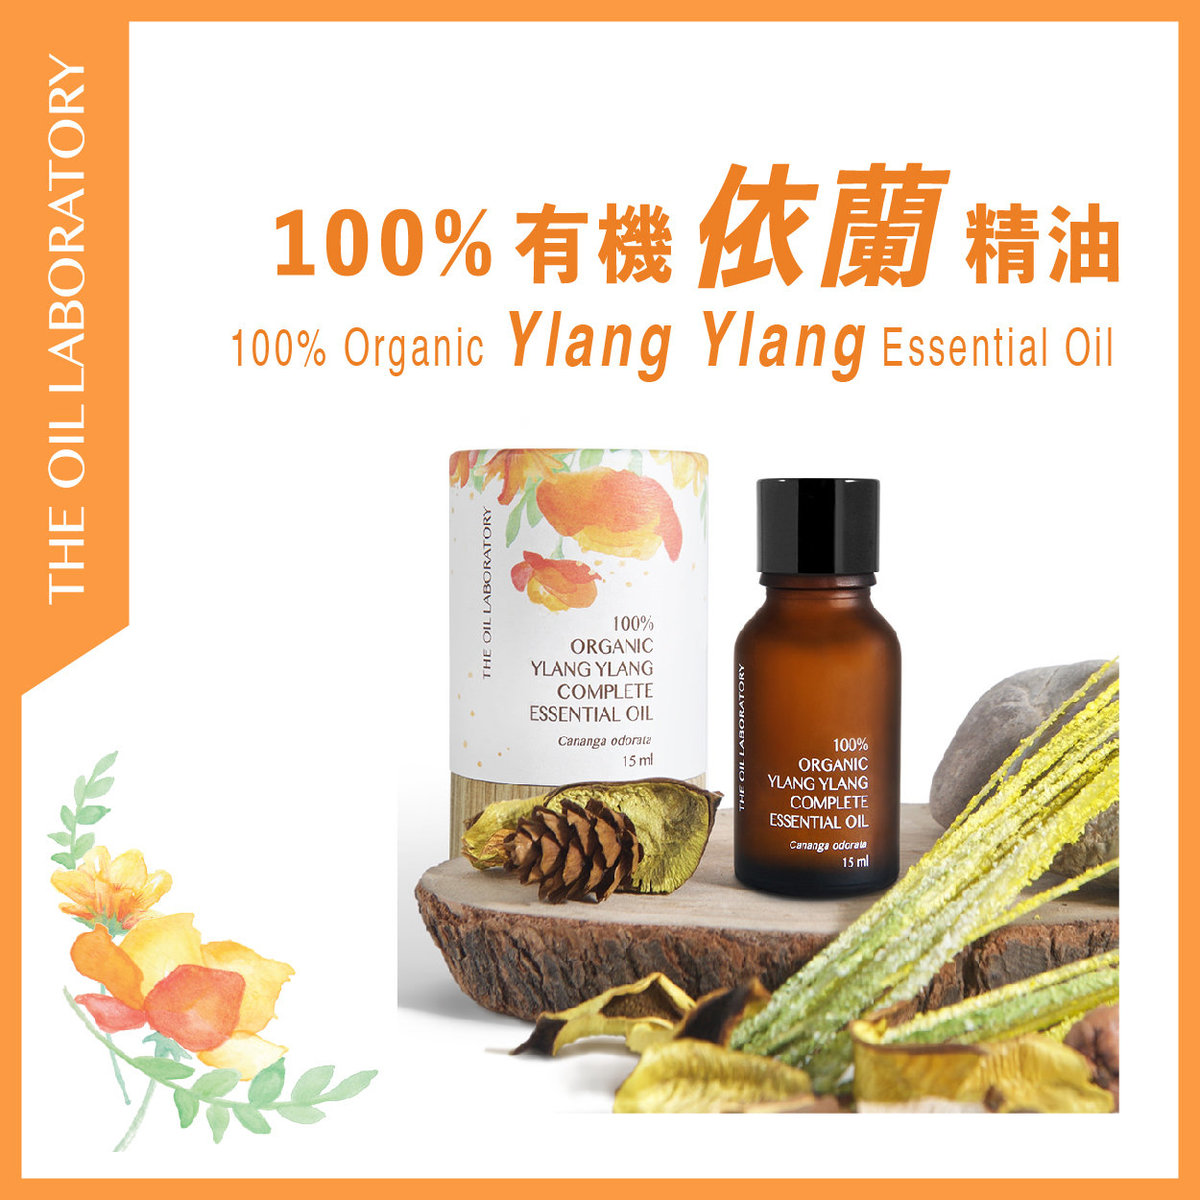 100% Organic Ylang Ylang Complete Essential Oil